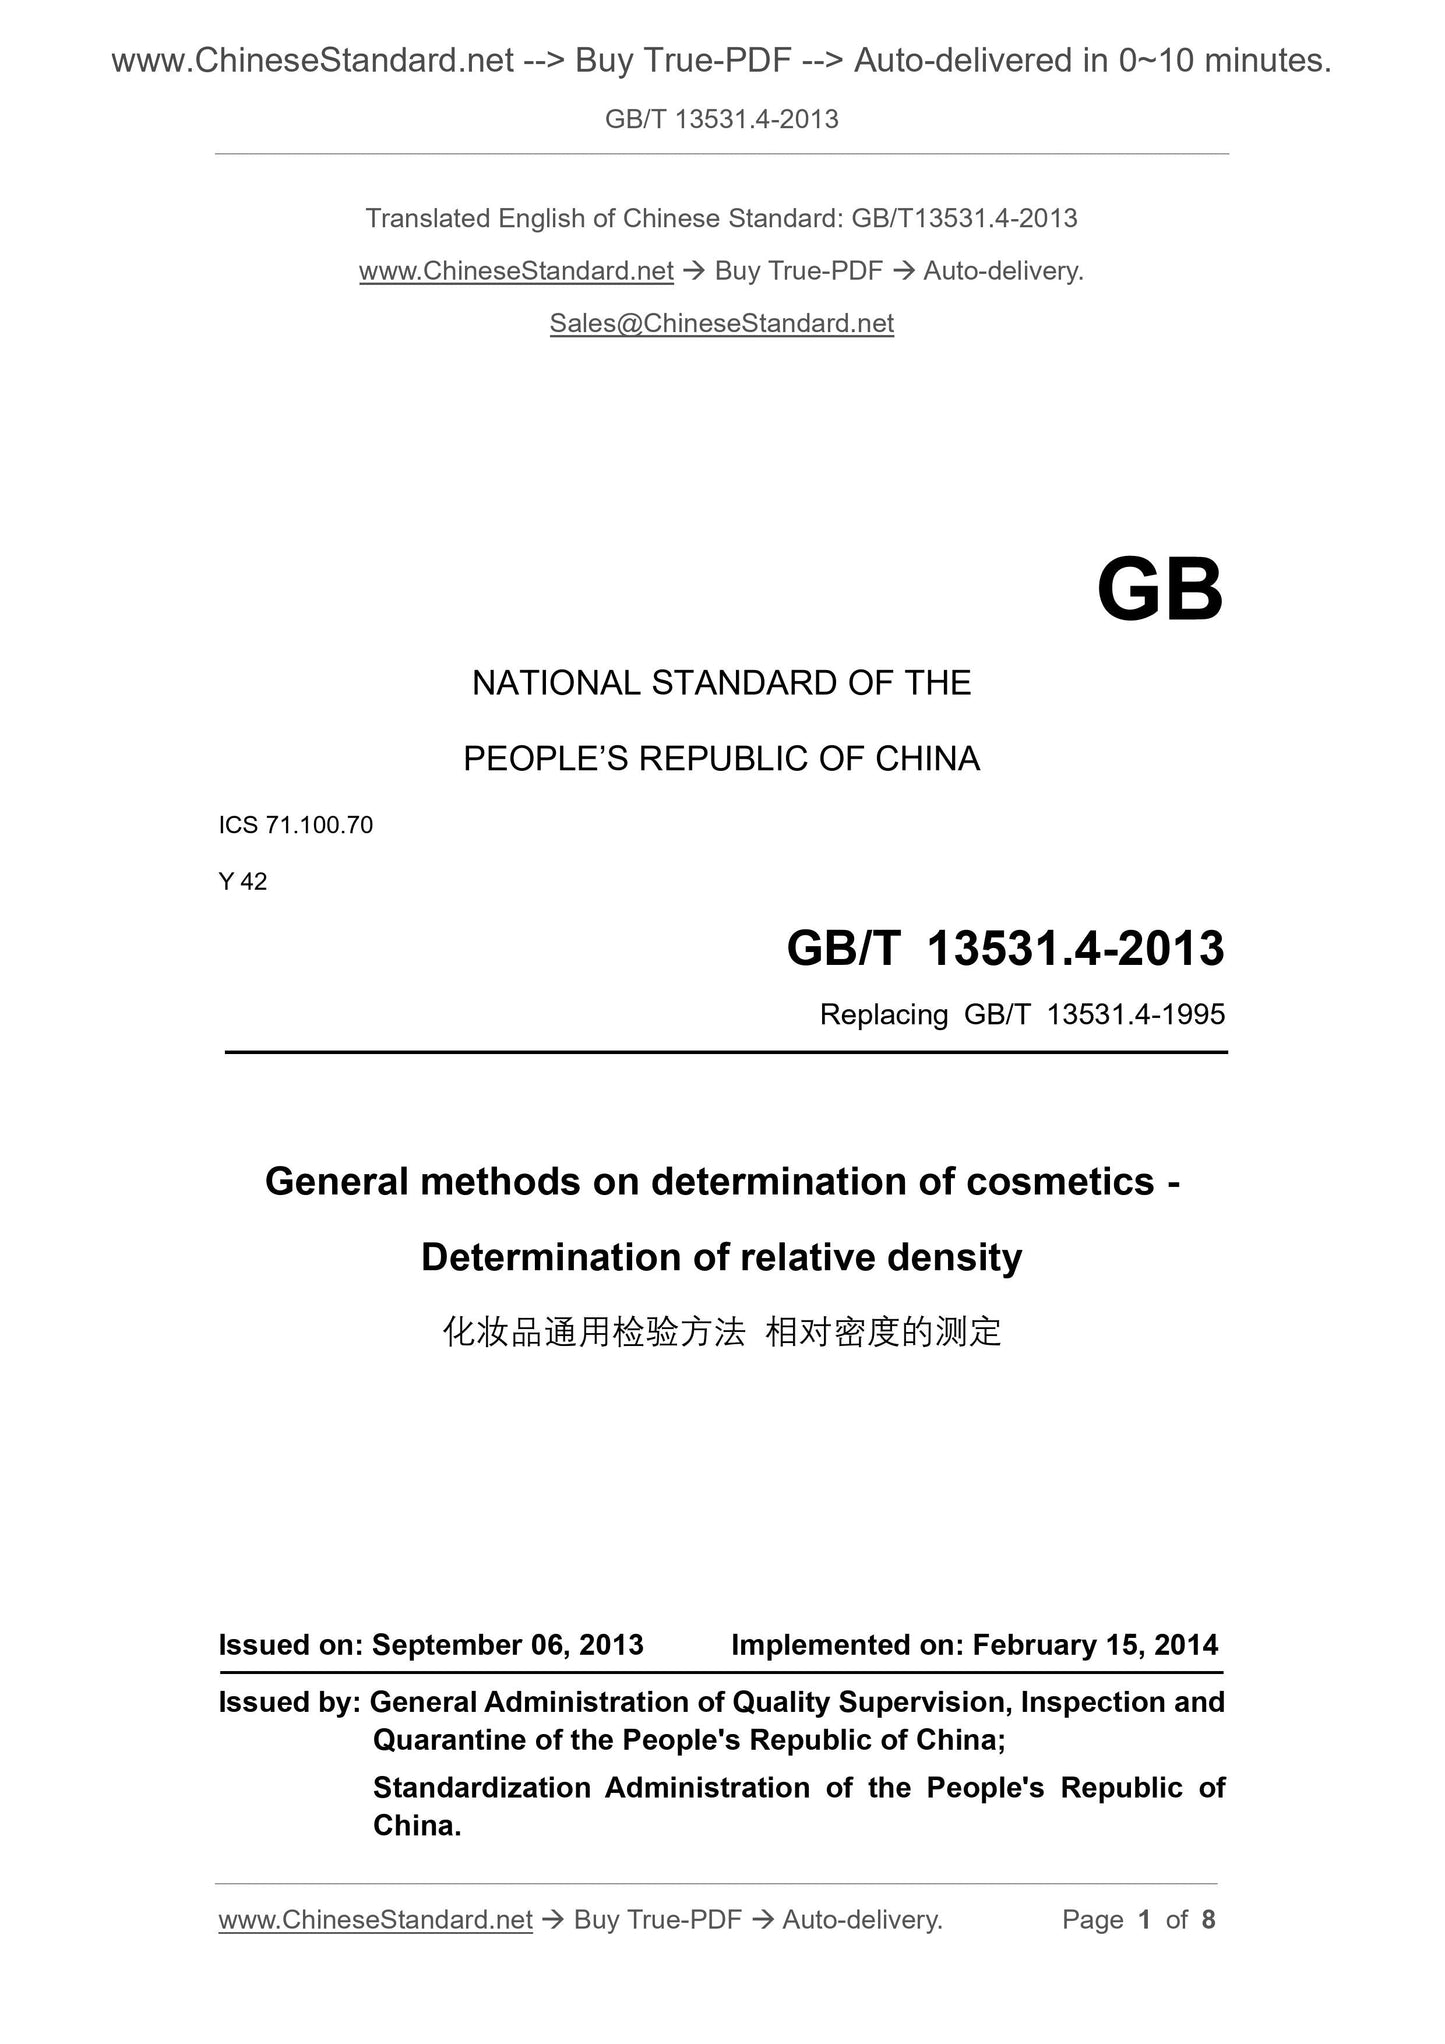 GB/T 13531.4-2013 Page 1